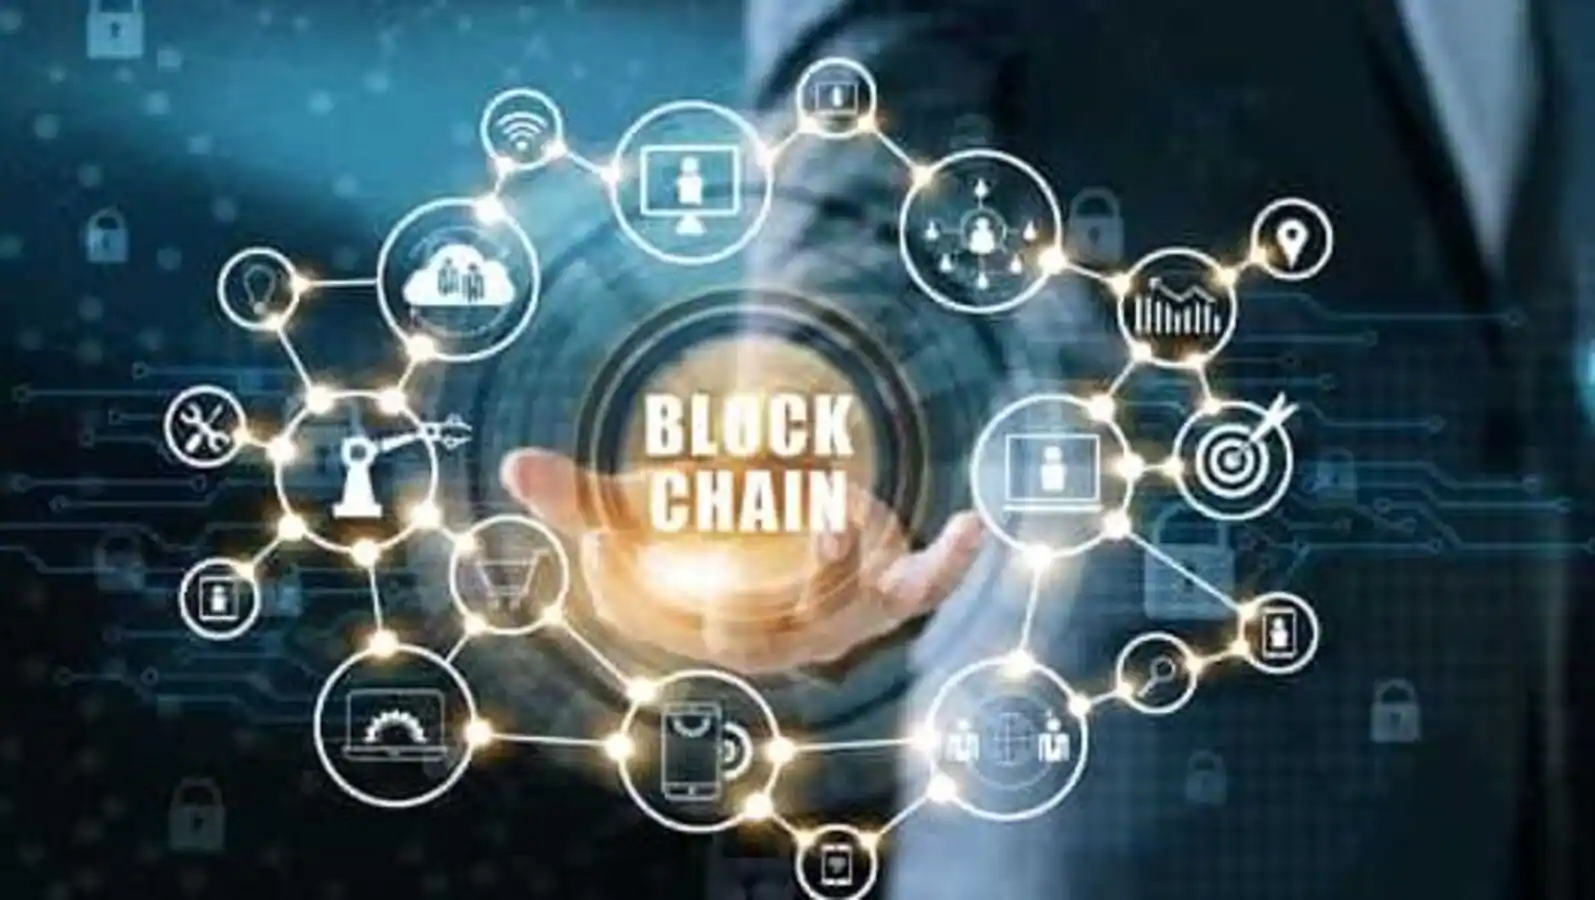 unleashing-the-power-of-blockchain-technology-decentralization-and-beyond